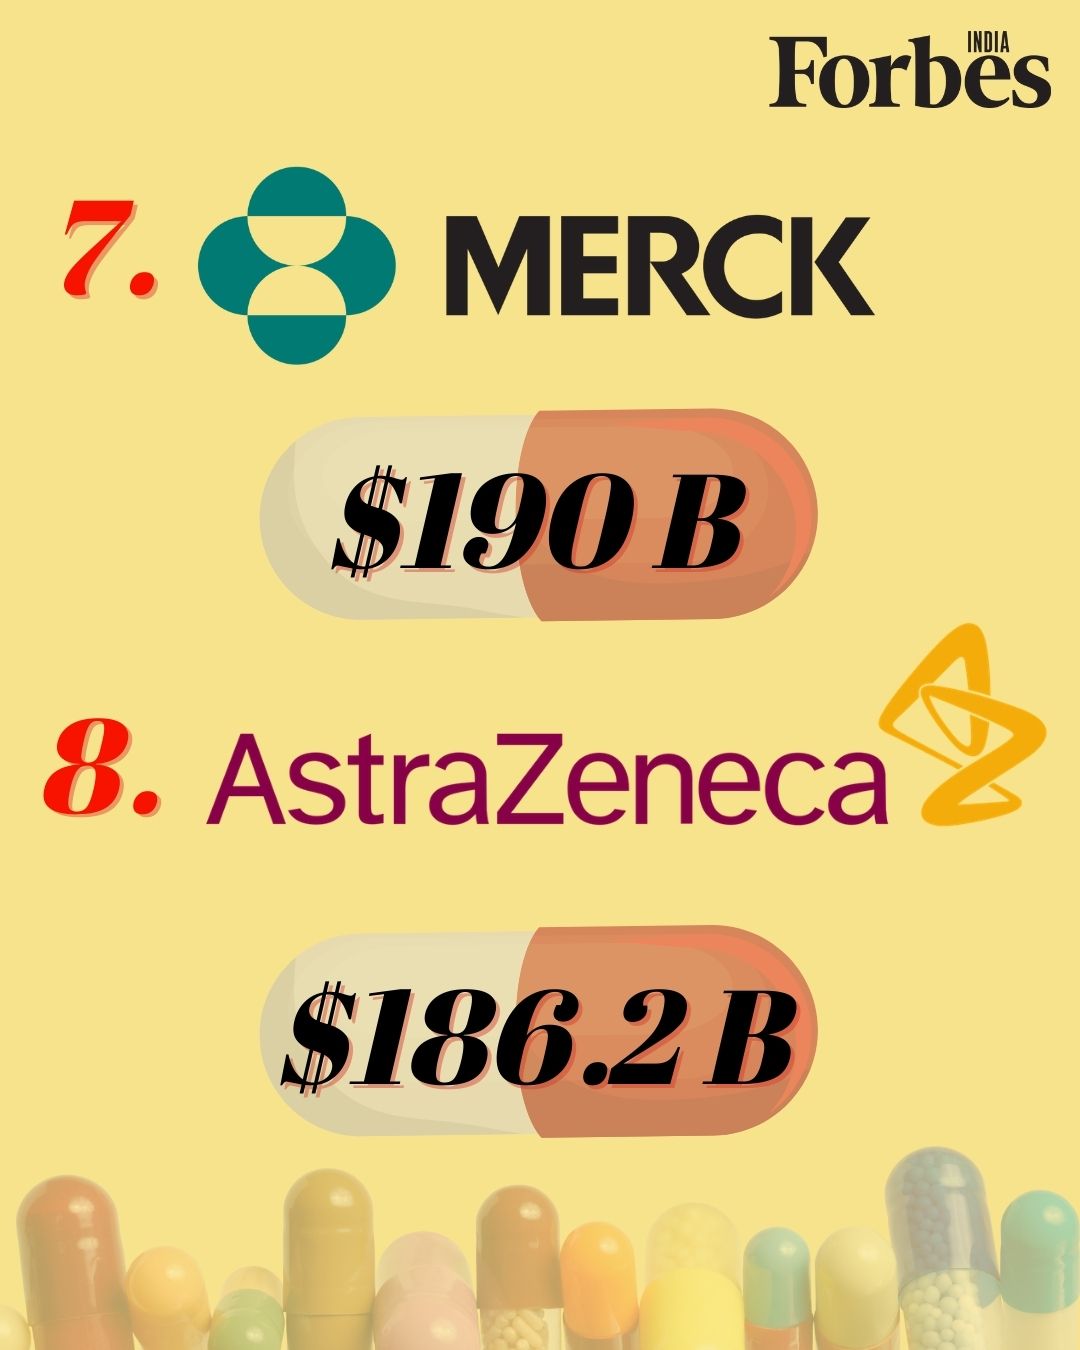 These are the top 10 pharma companies in the world